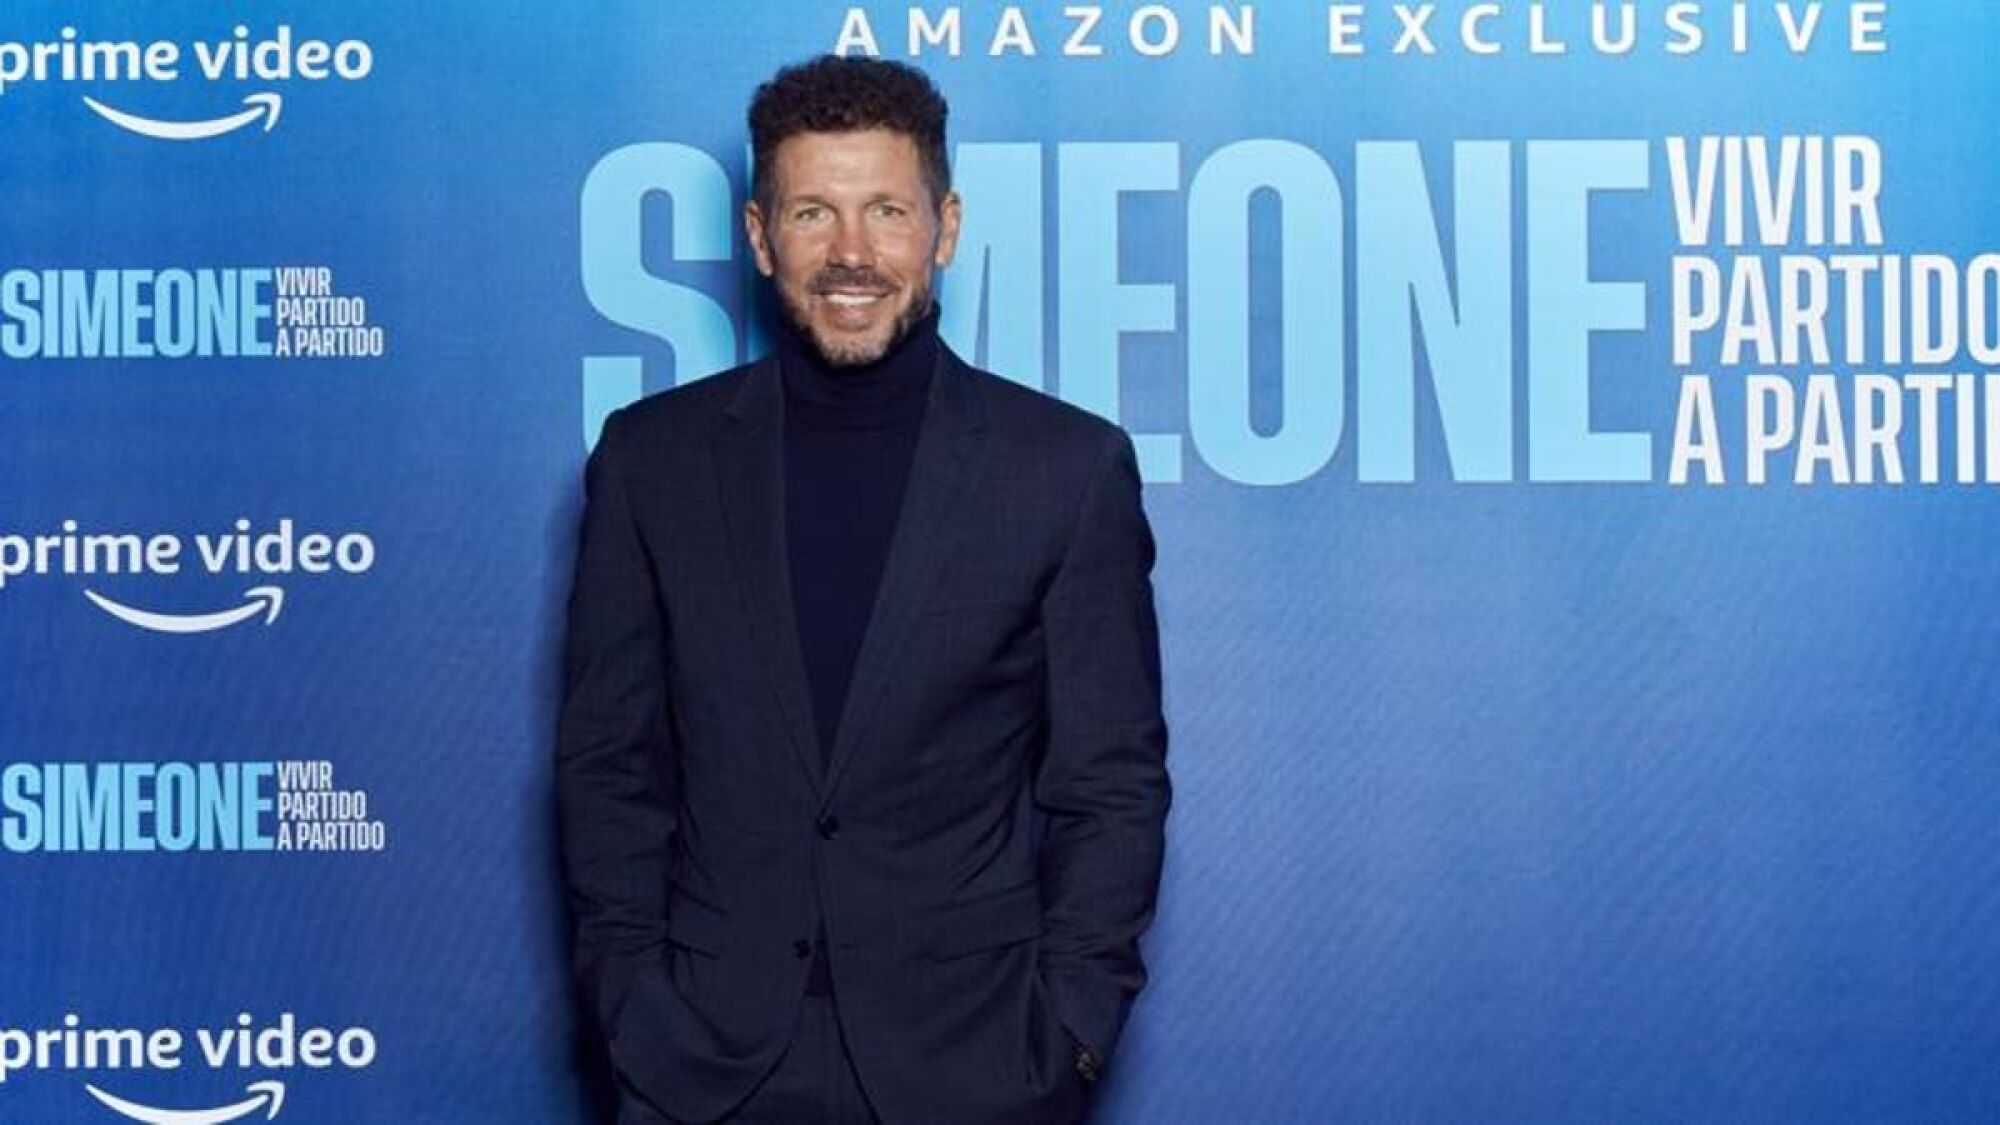 Documentary about Diego "Chulo" Simeone can be seen on Prime in Latin America, and has yet to be announced in the United States.